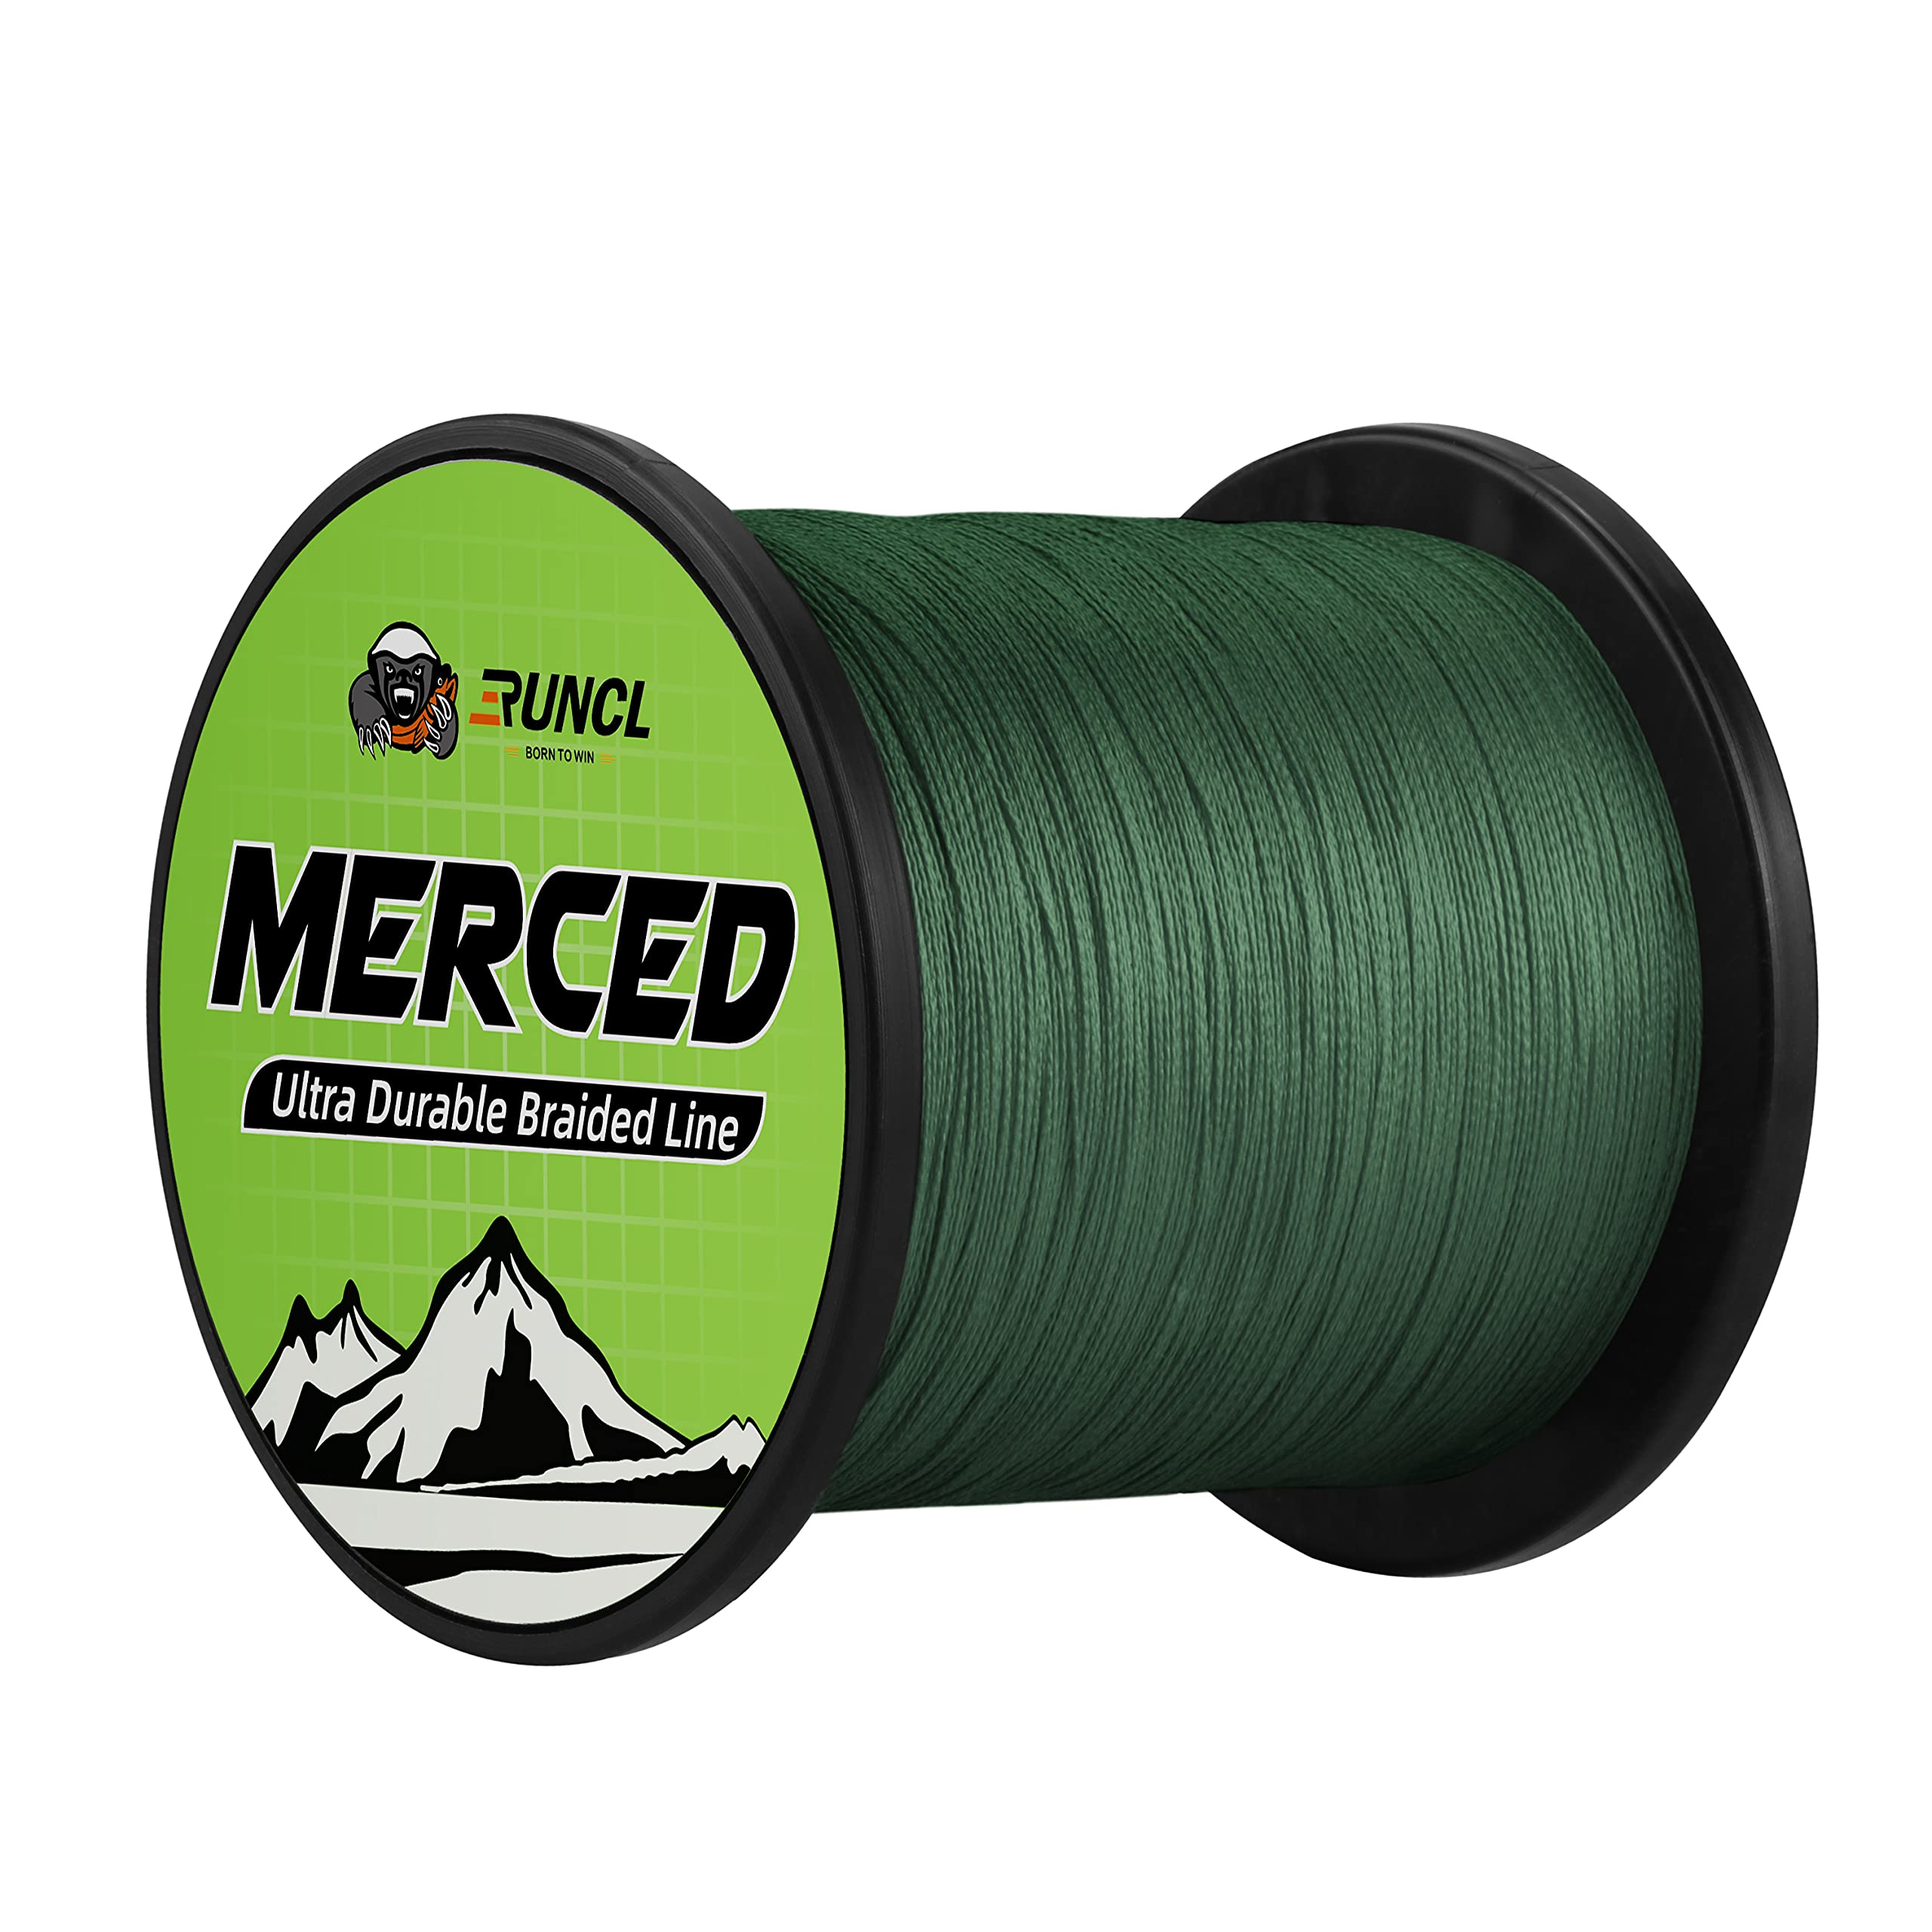 RUNCL Braided Fishing Line Merced, 1000 500 300 Yards Braided Line 4 8  Strands, 6-200LB - Proprietary Weaving Tech, Thin-Coating Tech, Stronger  Smoother - Fishing Line for Freshwater Saltwater Moss Green 8LB(3.6kgs)/0.07mm  - 300yds(4 Strands)